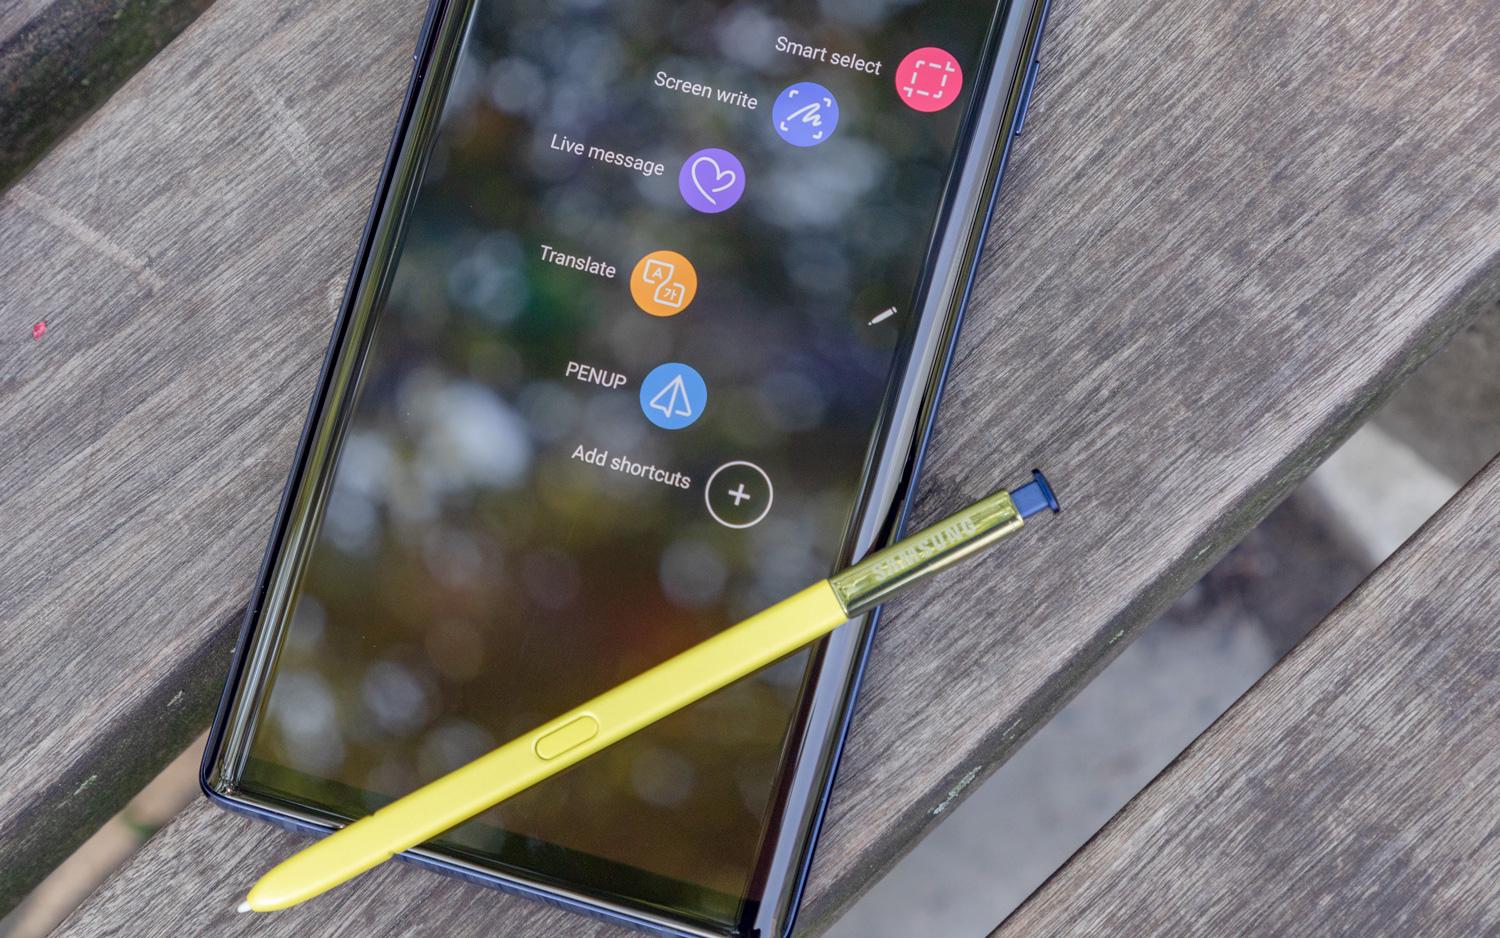  Galaxy Note 10 Launch Reportedly Set for Aug. 7 with Surprise Feature